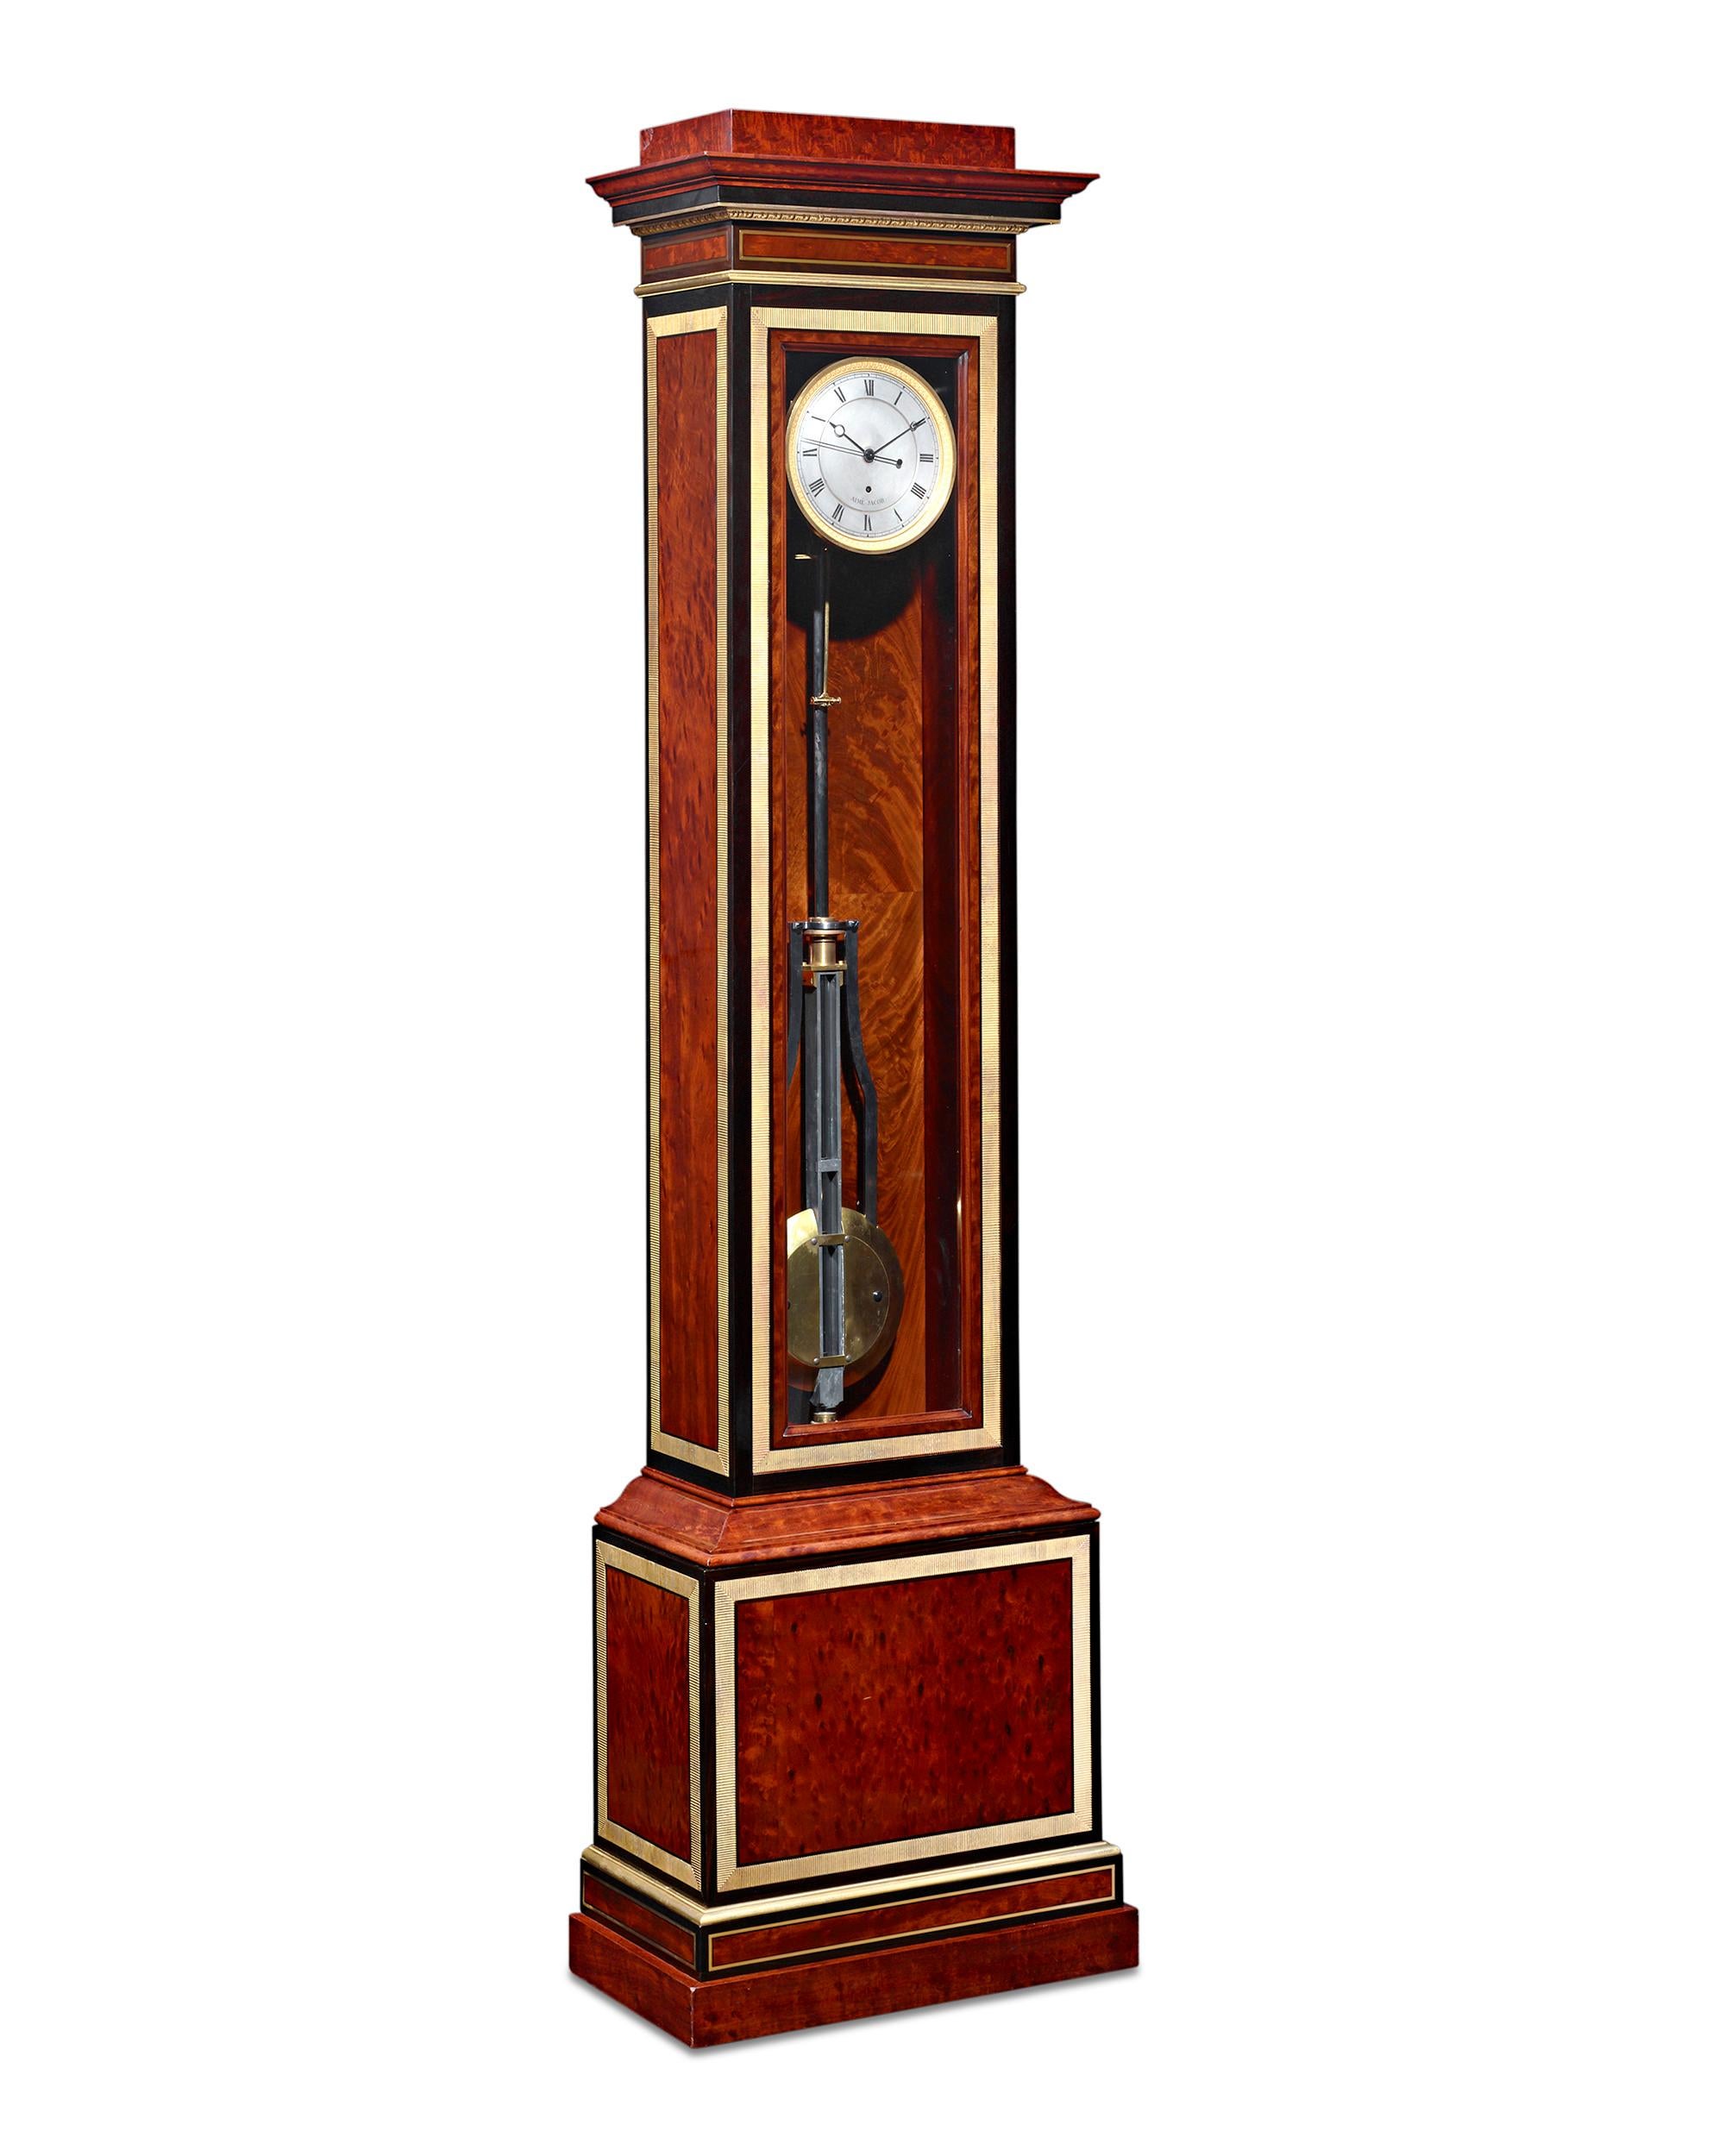 This important regulator clock beautifully demonstrates the heights of precision clockmaking. While regulator clocks are known for their incredible accuracy, this timepiece is truly exceptional in its mechanical proficiency. Crafted and signed by